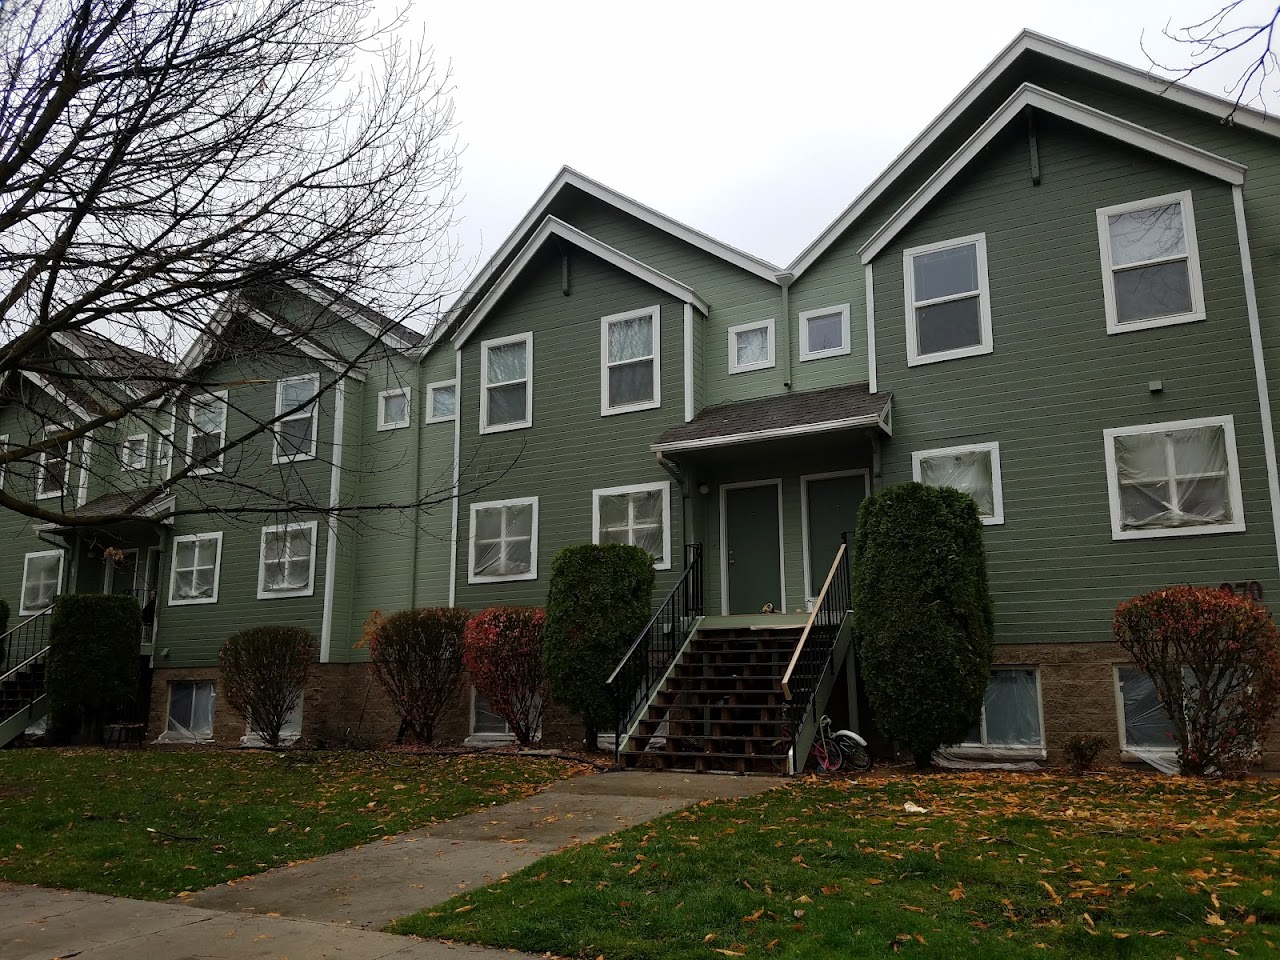 Photo of DAVIS PARK. Affordable housing located at 970 NORTH 29TH STREET BOISE, ID 83702